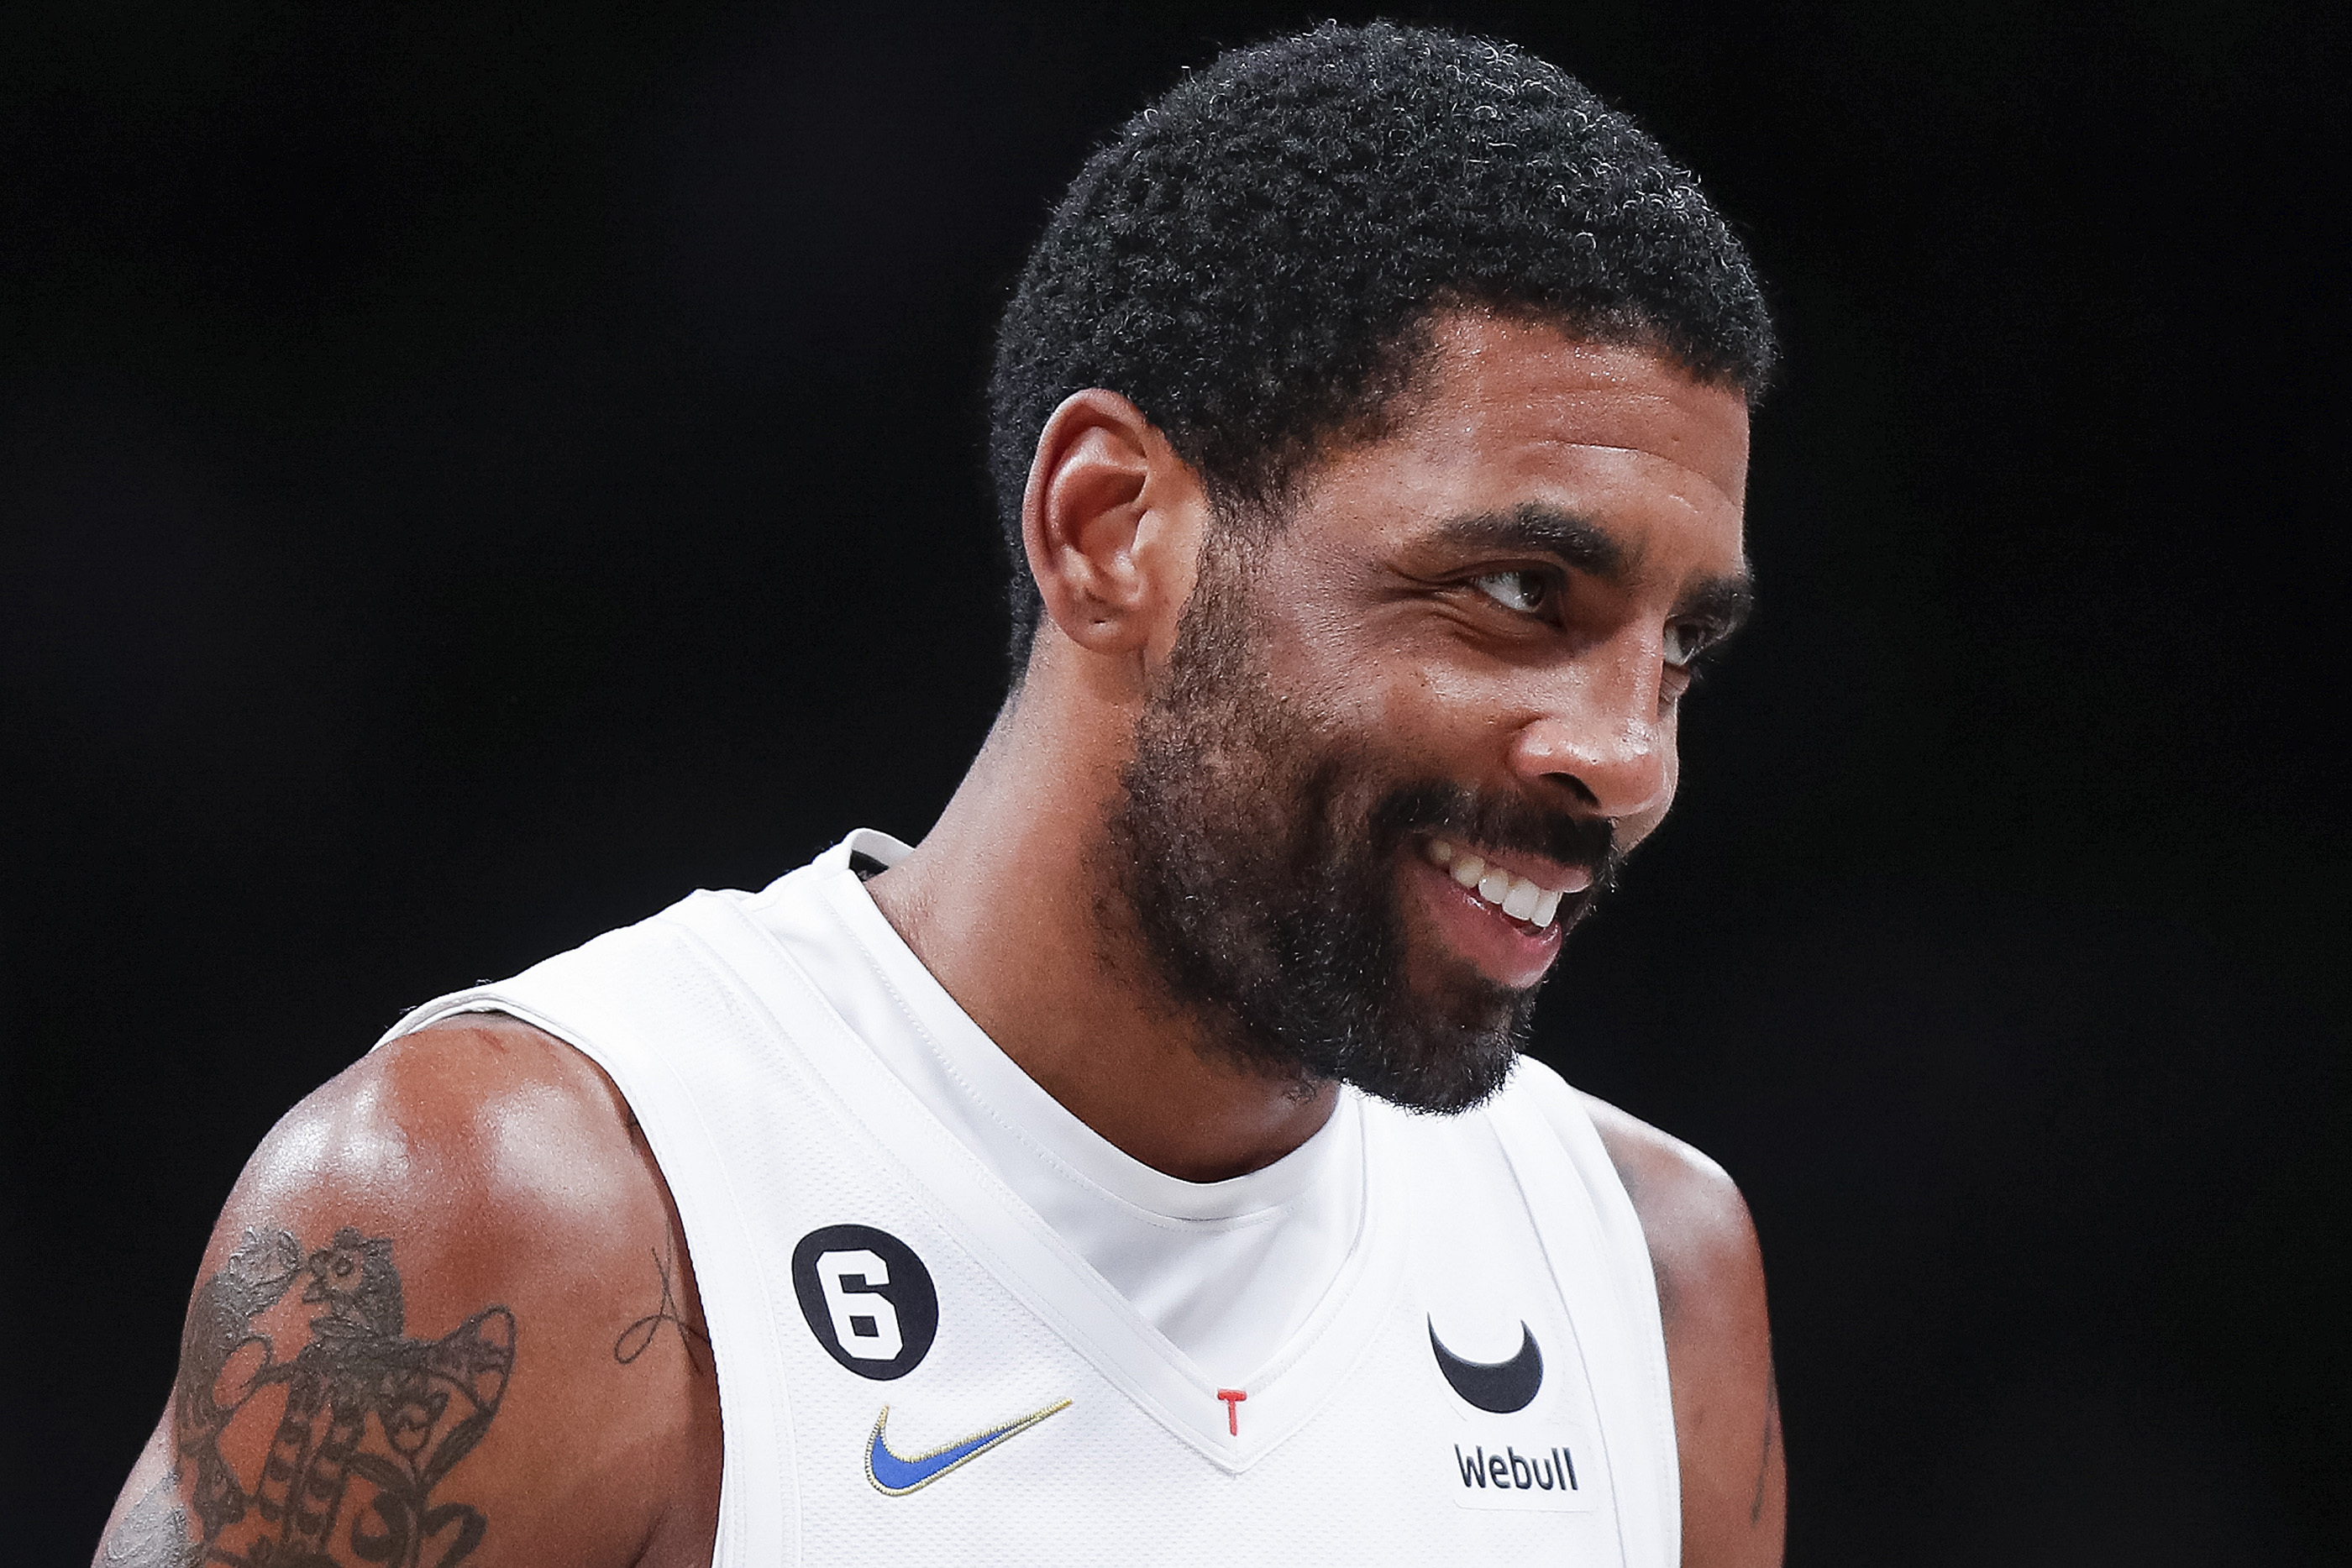 Kyrie Irving gave jersey and shoes to military personnel